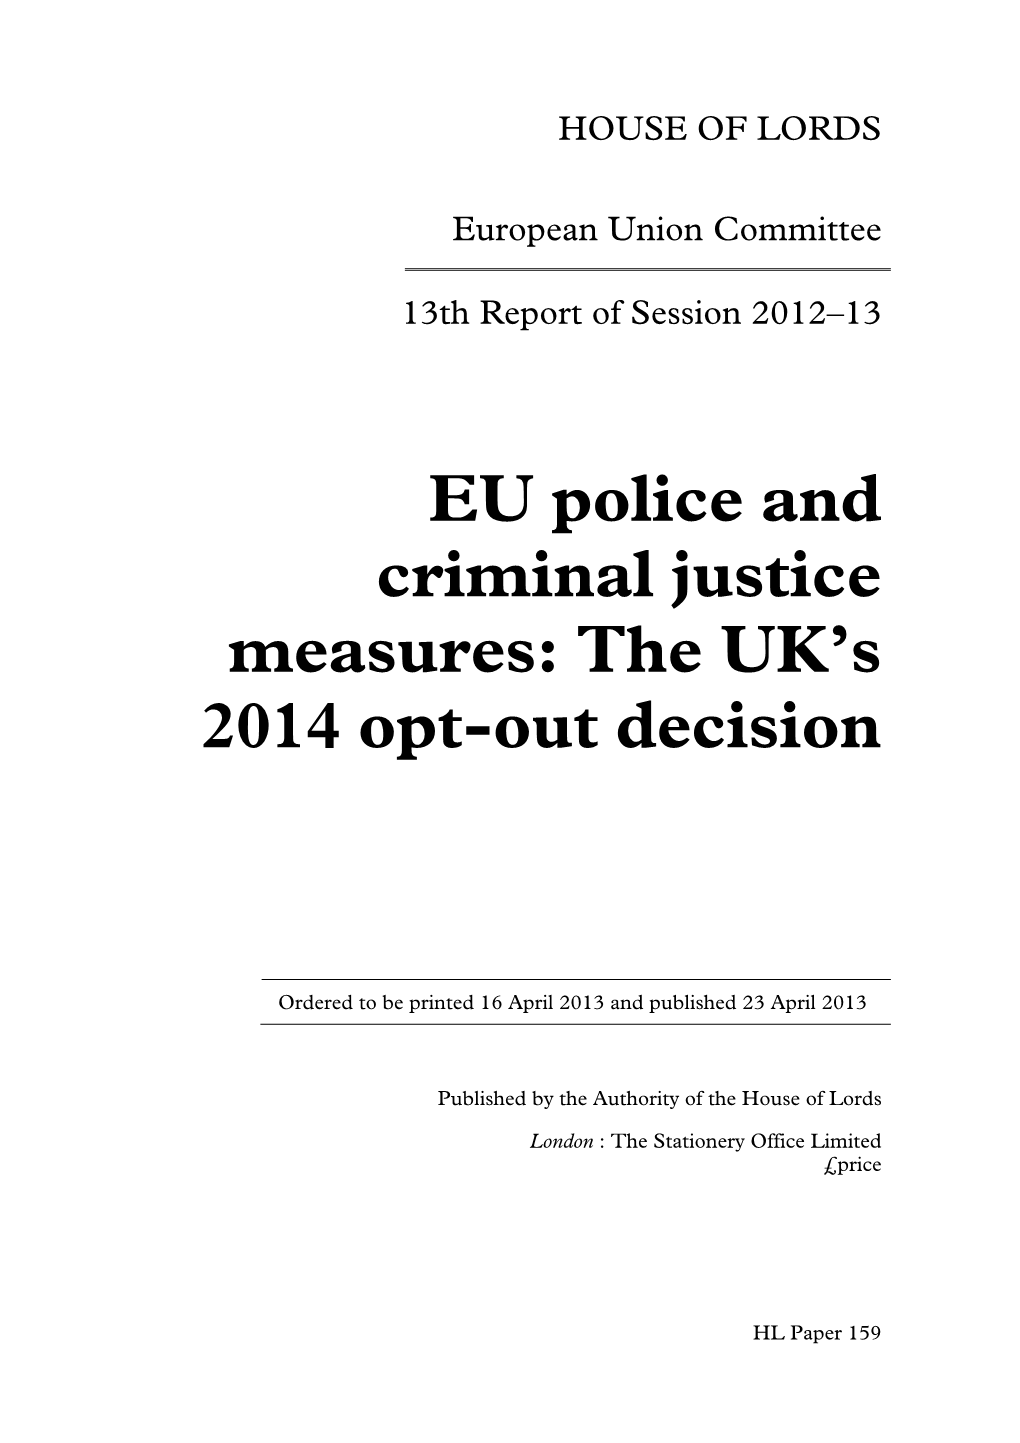 EU Police and Criminal Justice Measures: the UK’S 2014 Opt-Out Decision